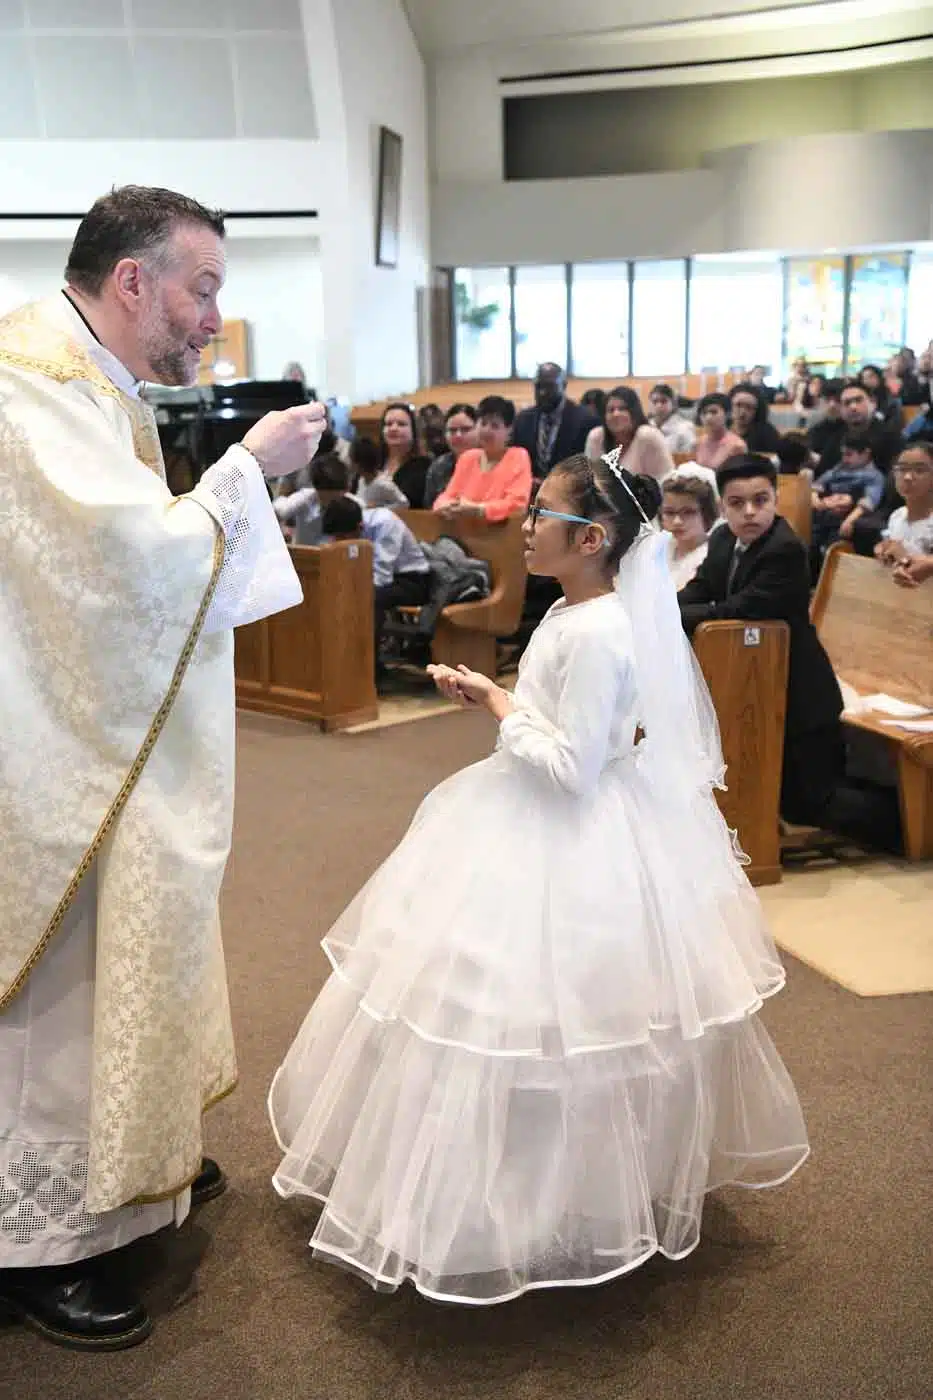 Young girl receiving first communion from priest